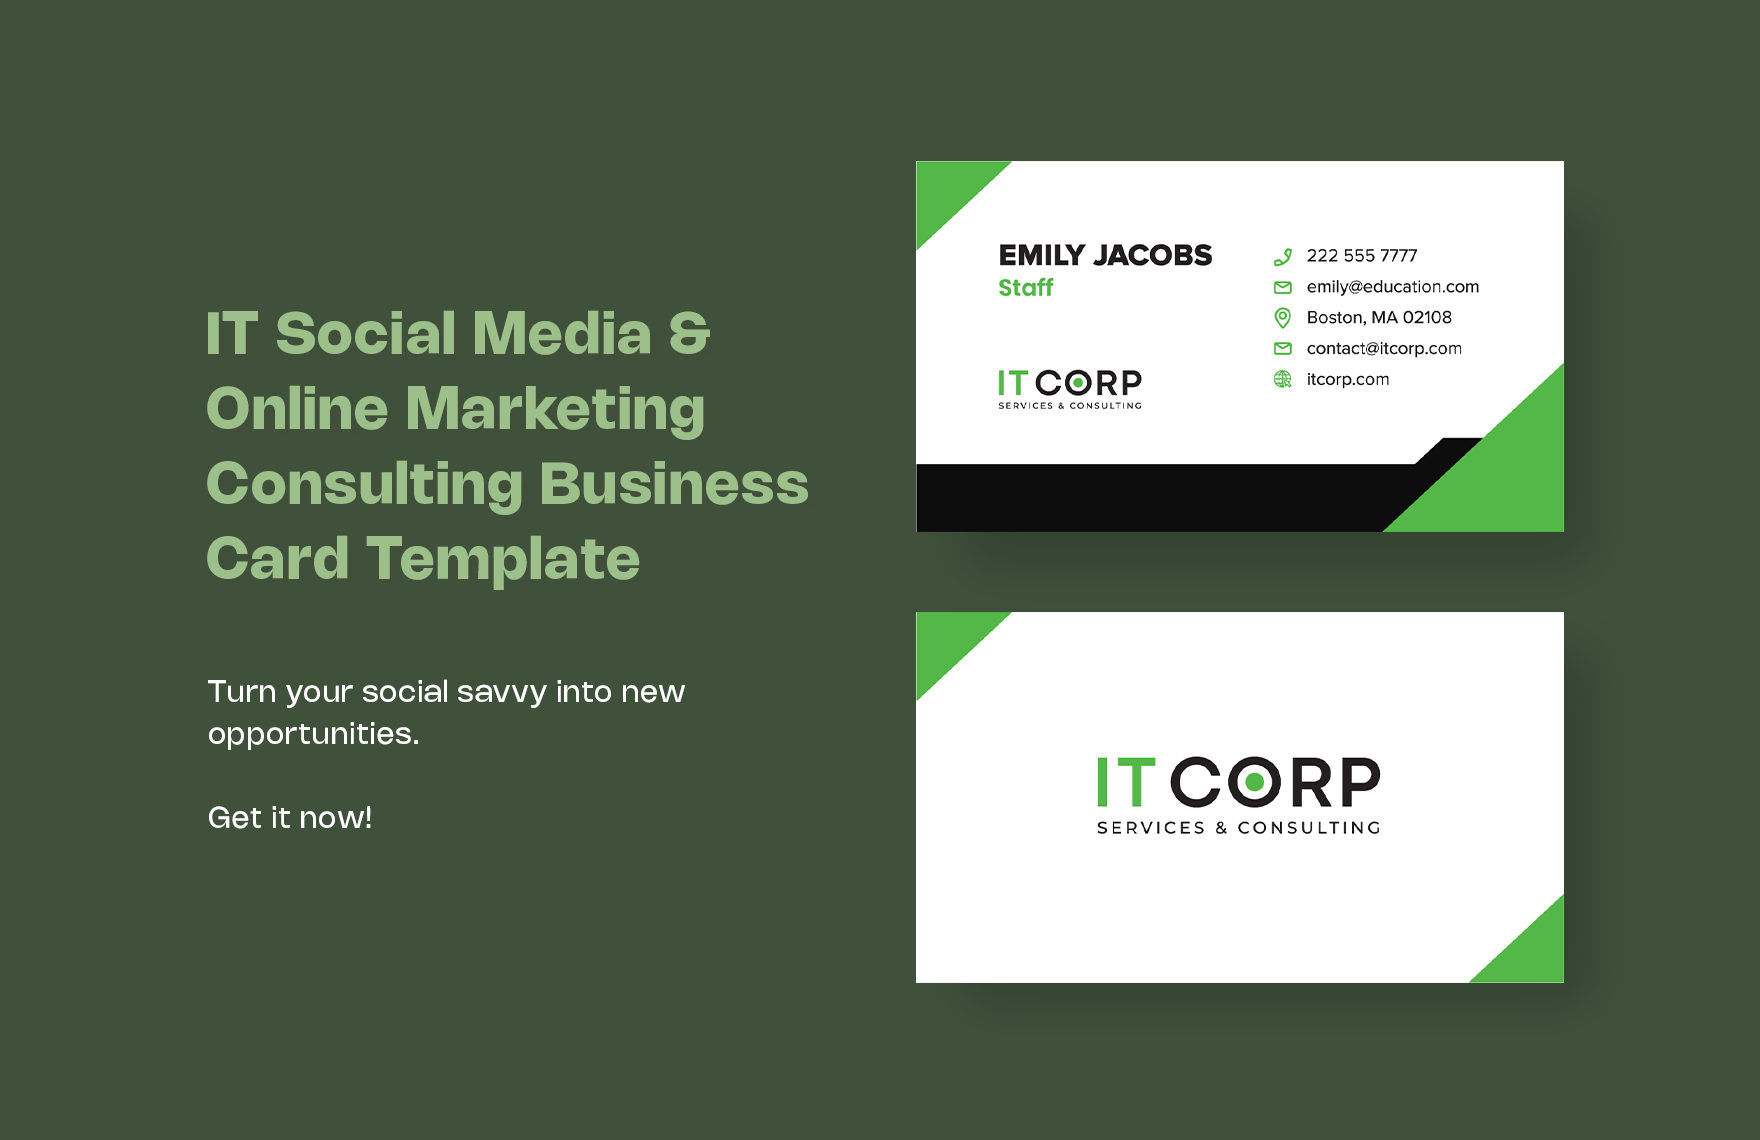 IT Social Media & Online Marketing Consulting Business Card Template